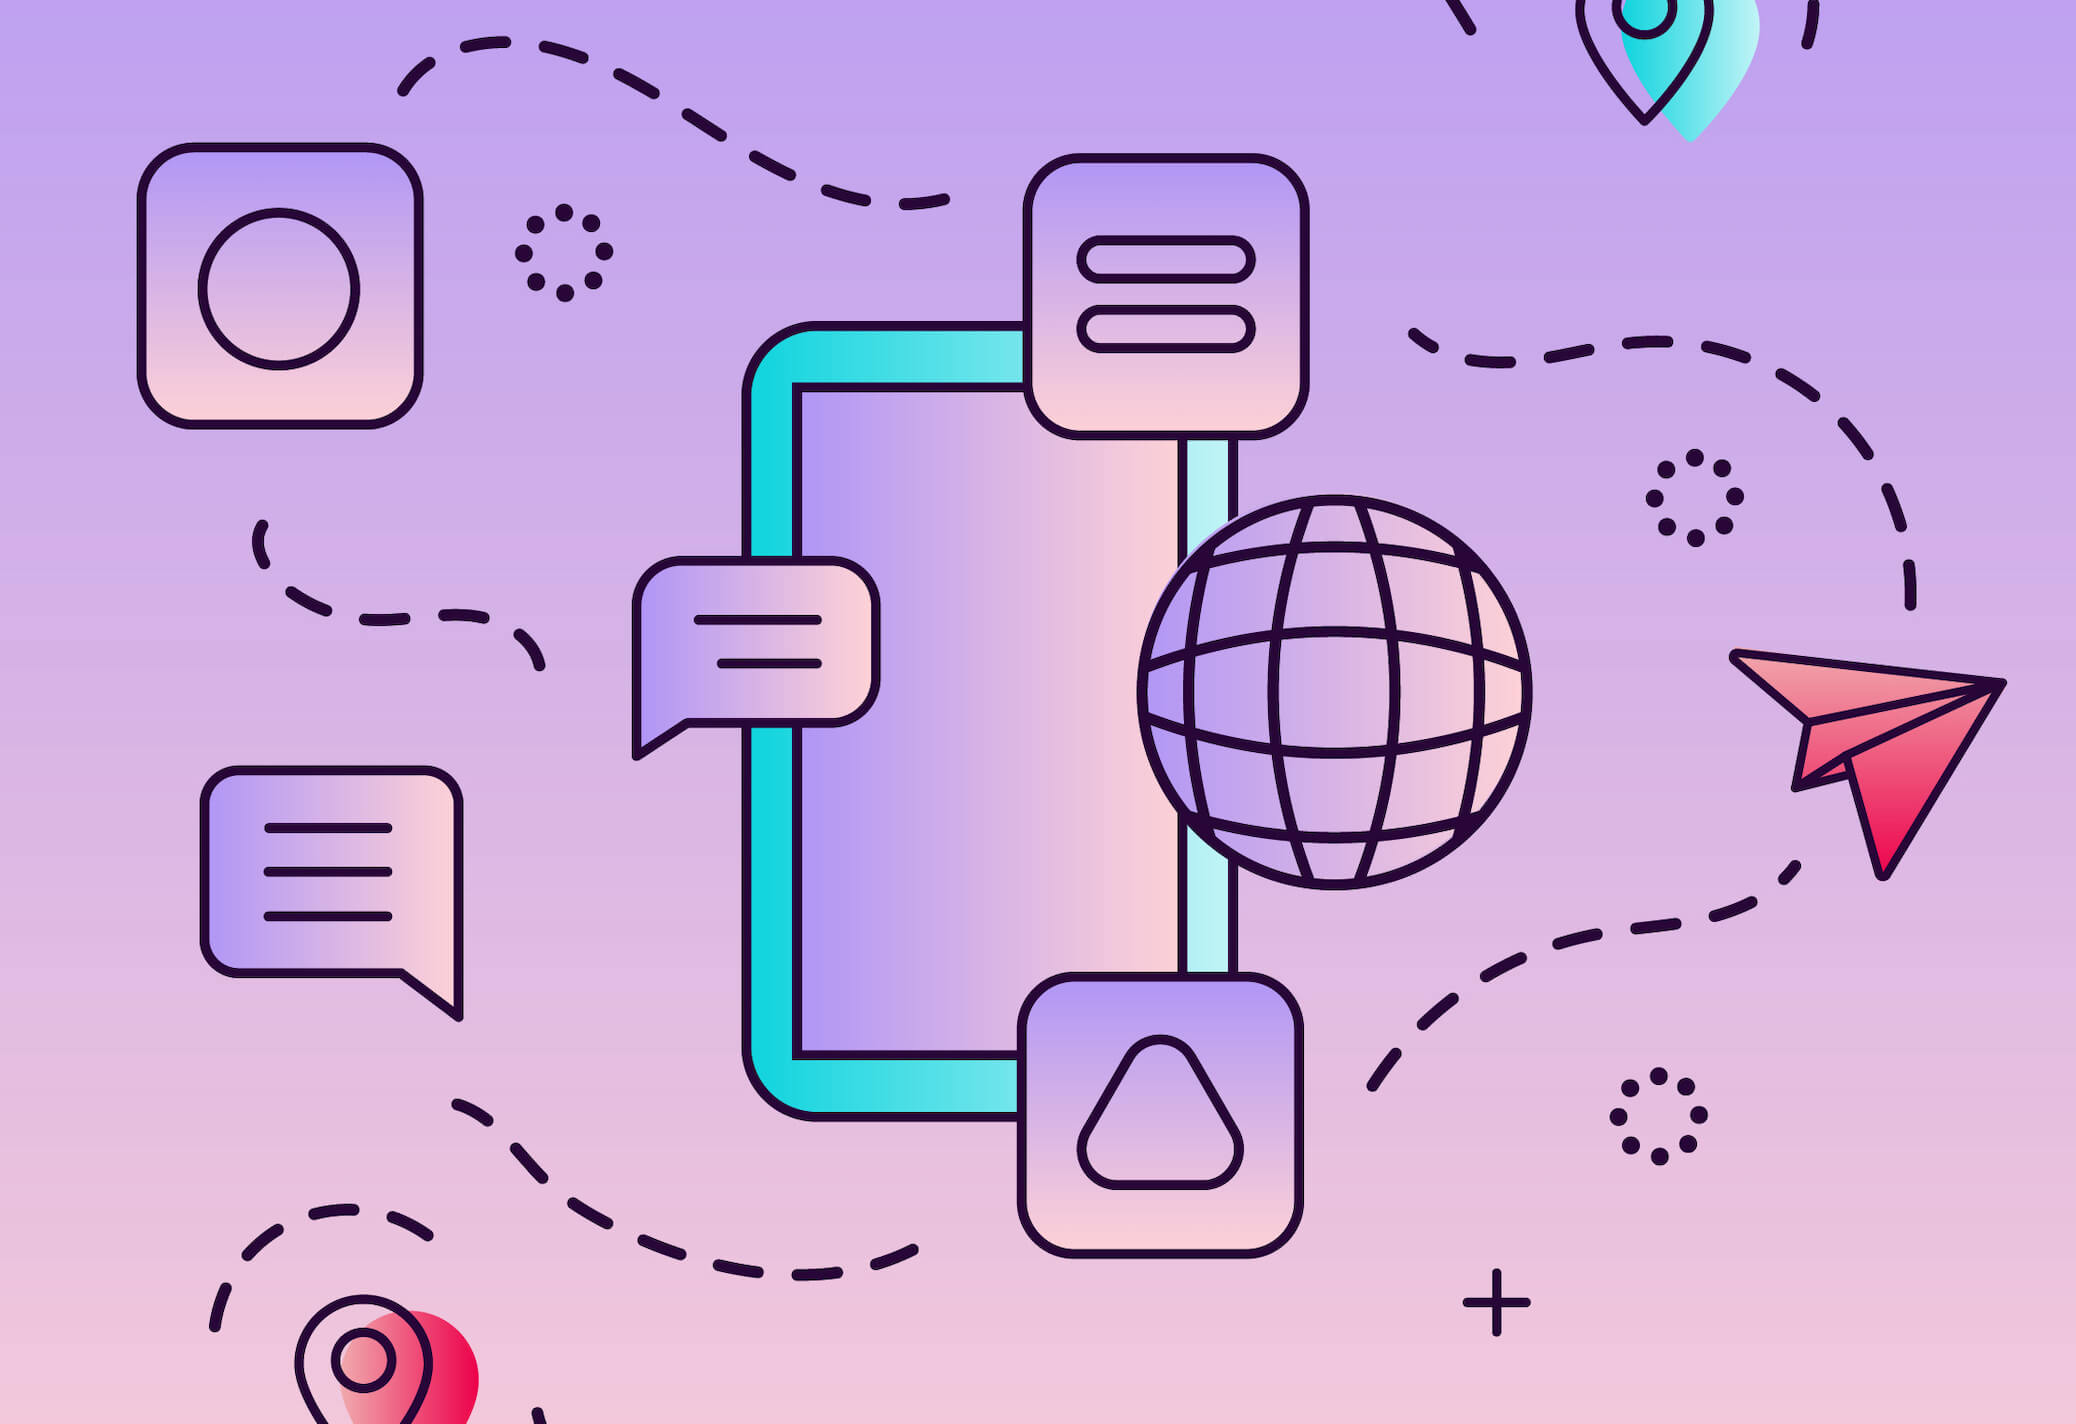 Finding Your Way Around the World of Interconnected Applications